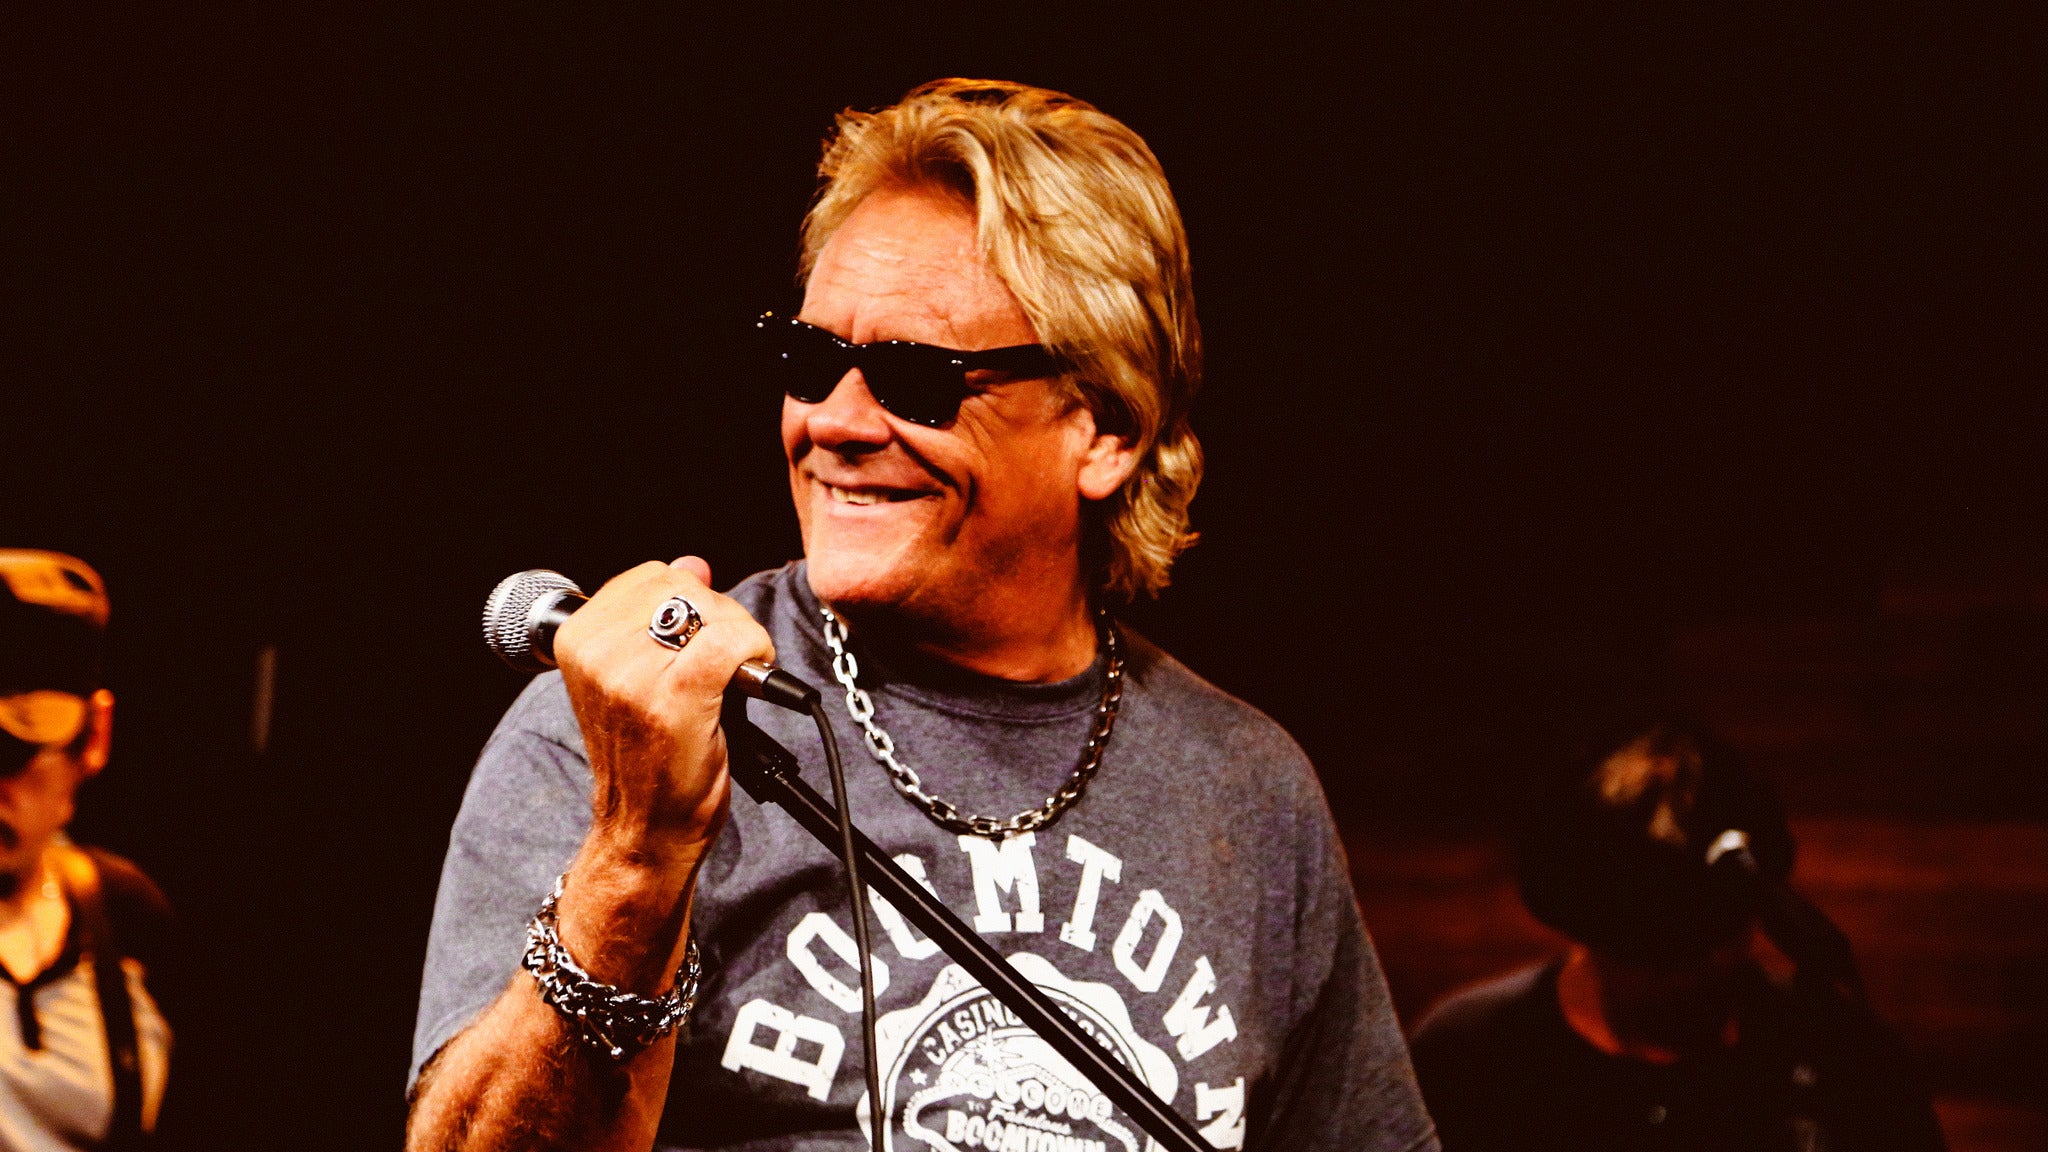 Brian Howe Bad Company Former Lead Singer in Northfield promo photo for Internet presale offer code